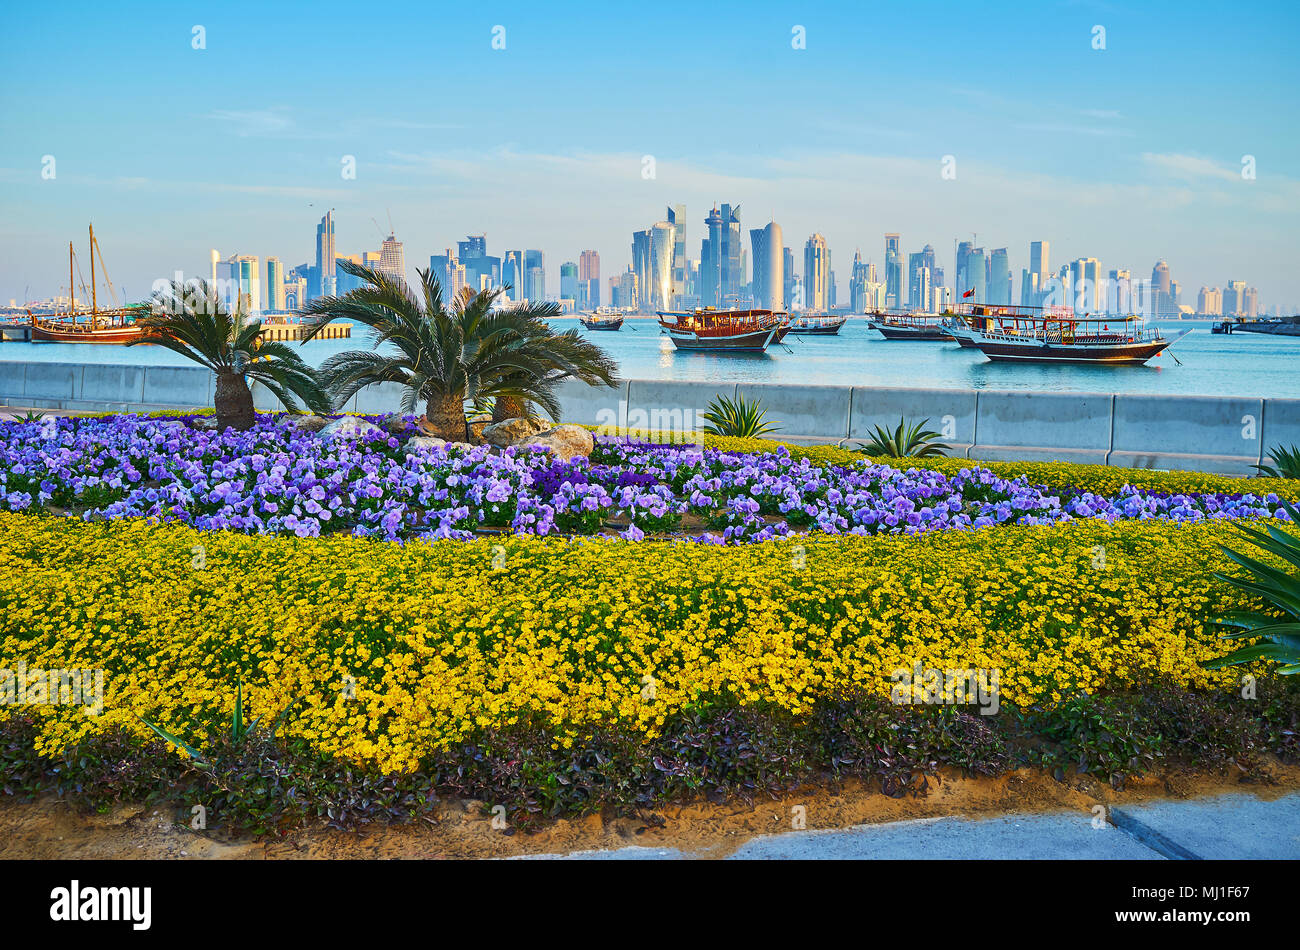 Corniche promenade is perfectly decorated with beautiful flower beds, tiny palms and trimmed bushes, Doha, Qatar. Stock Photo